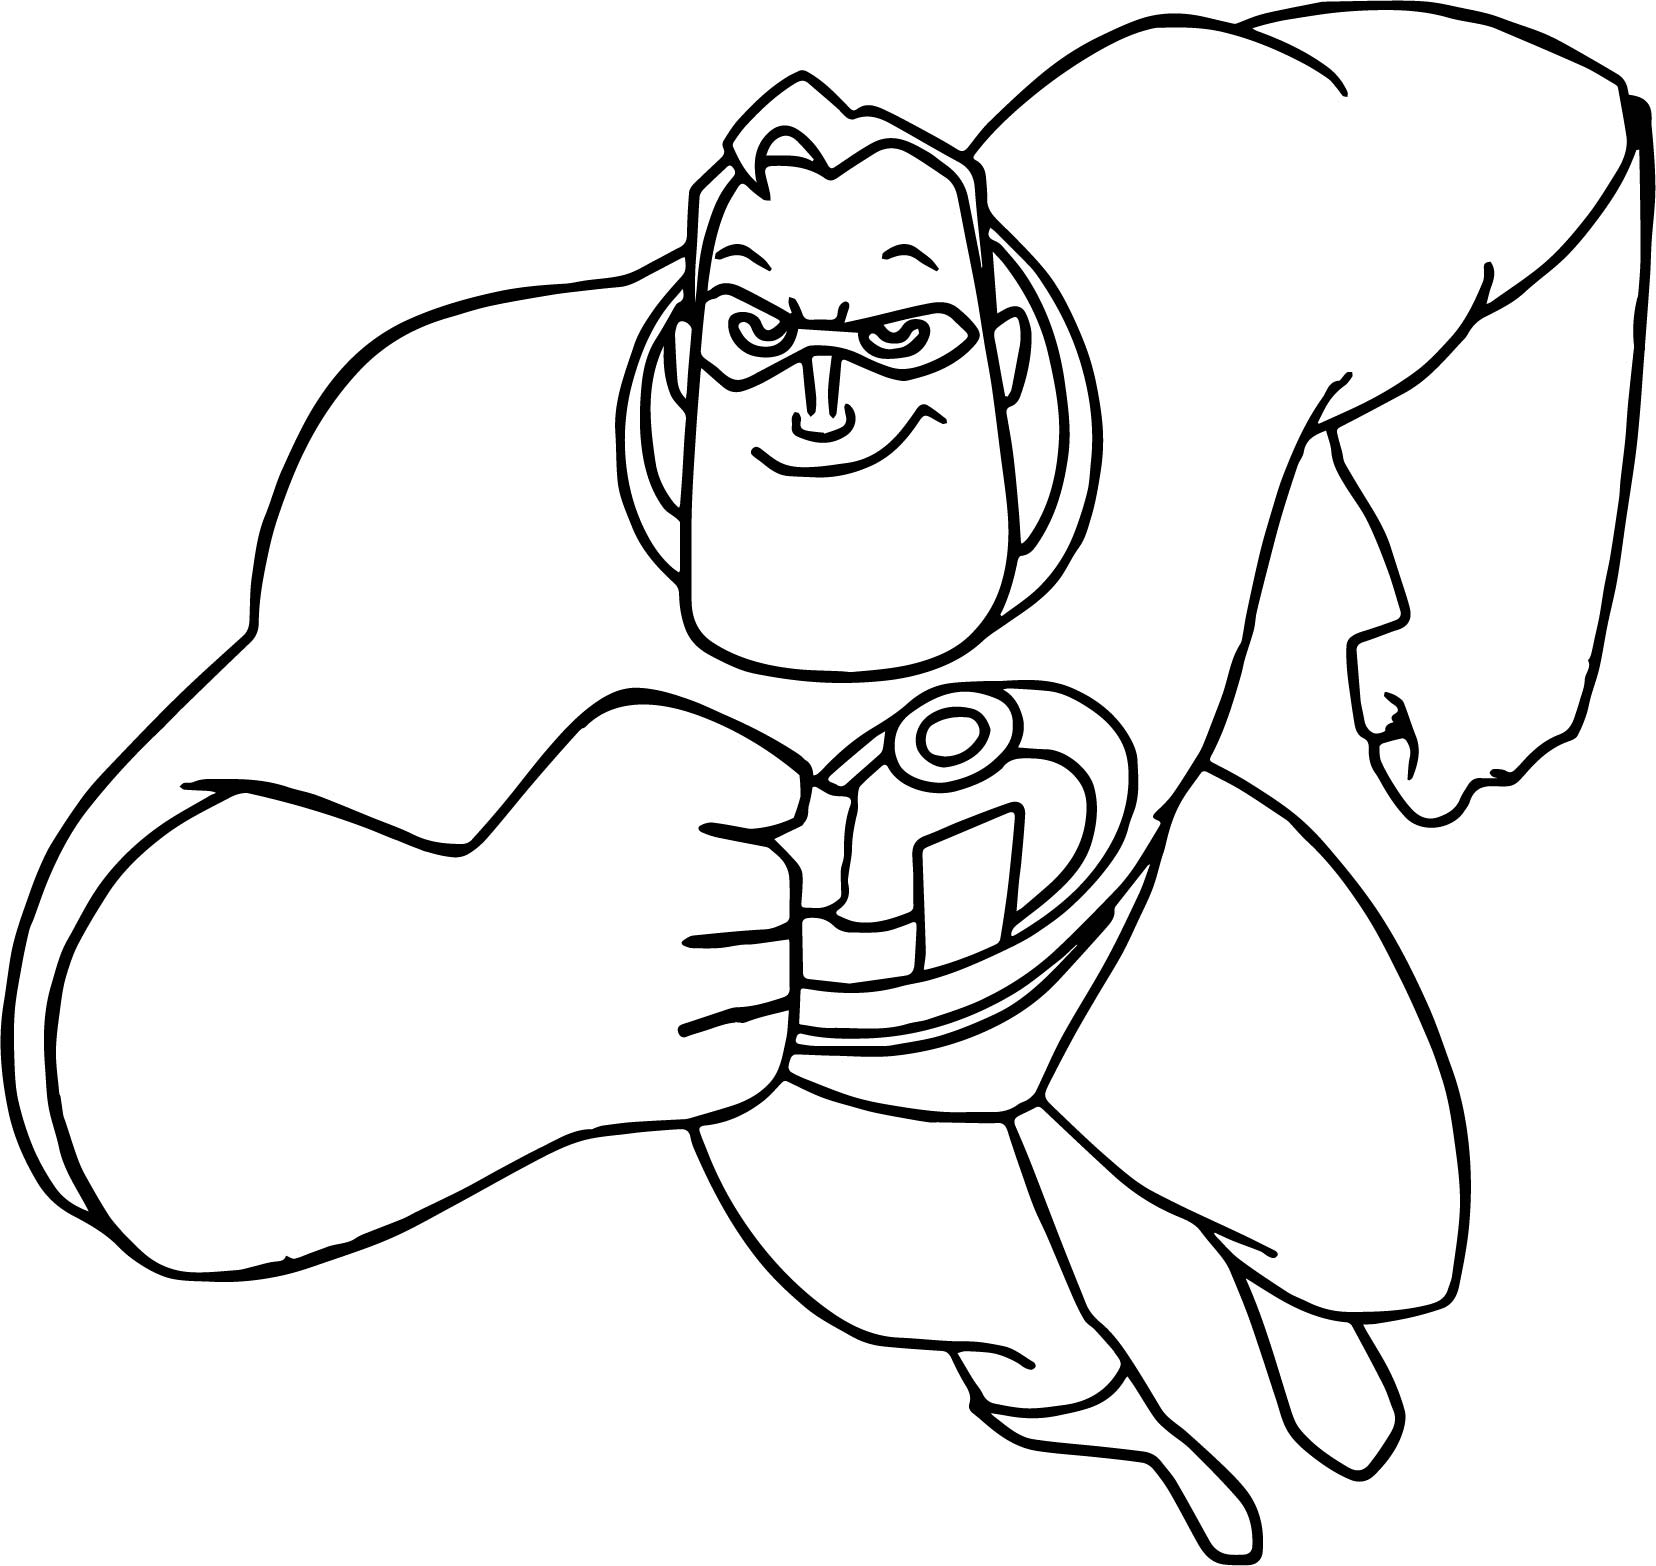 Strong Mr. Incredible Coloring Page   Free Printable Coloring ...